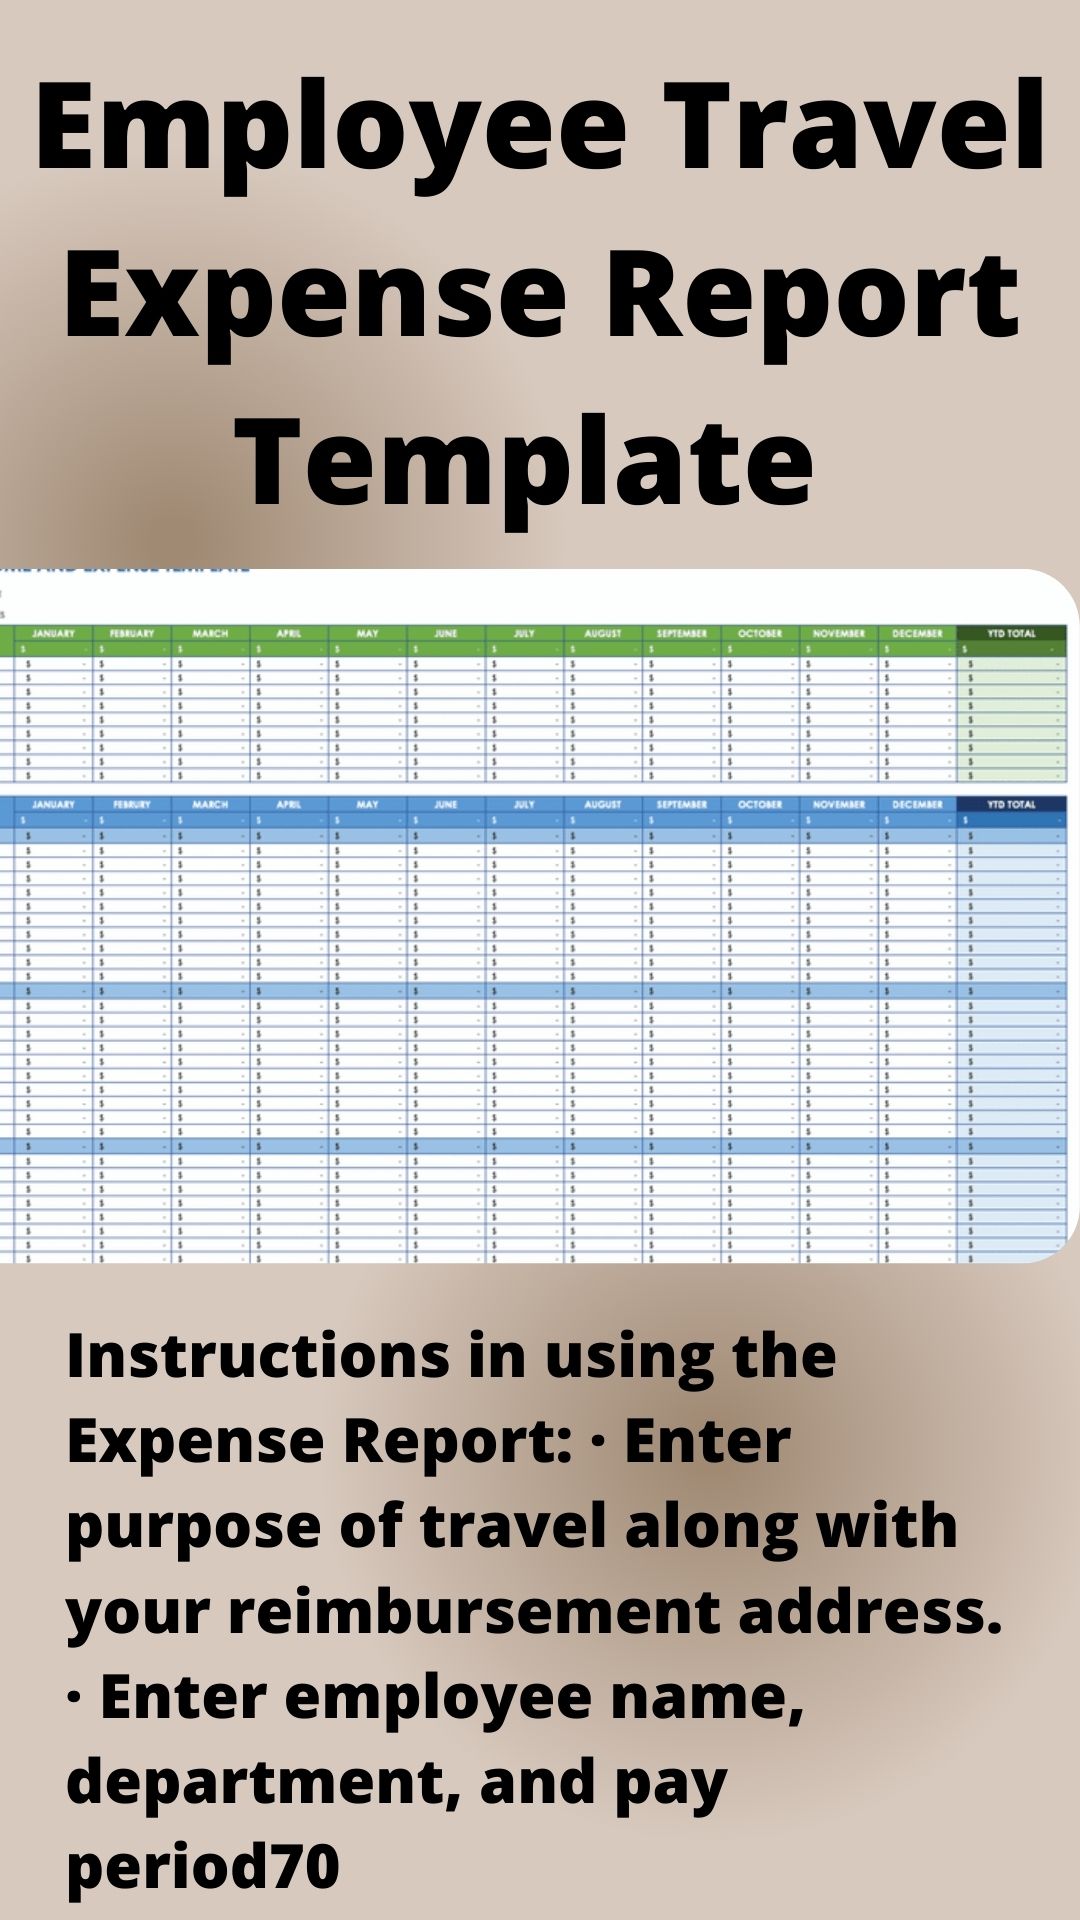 Expense request form template